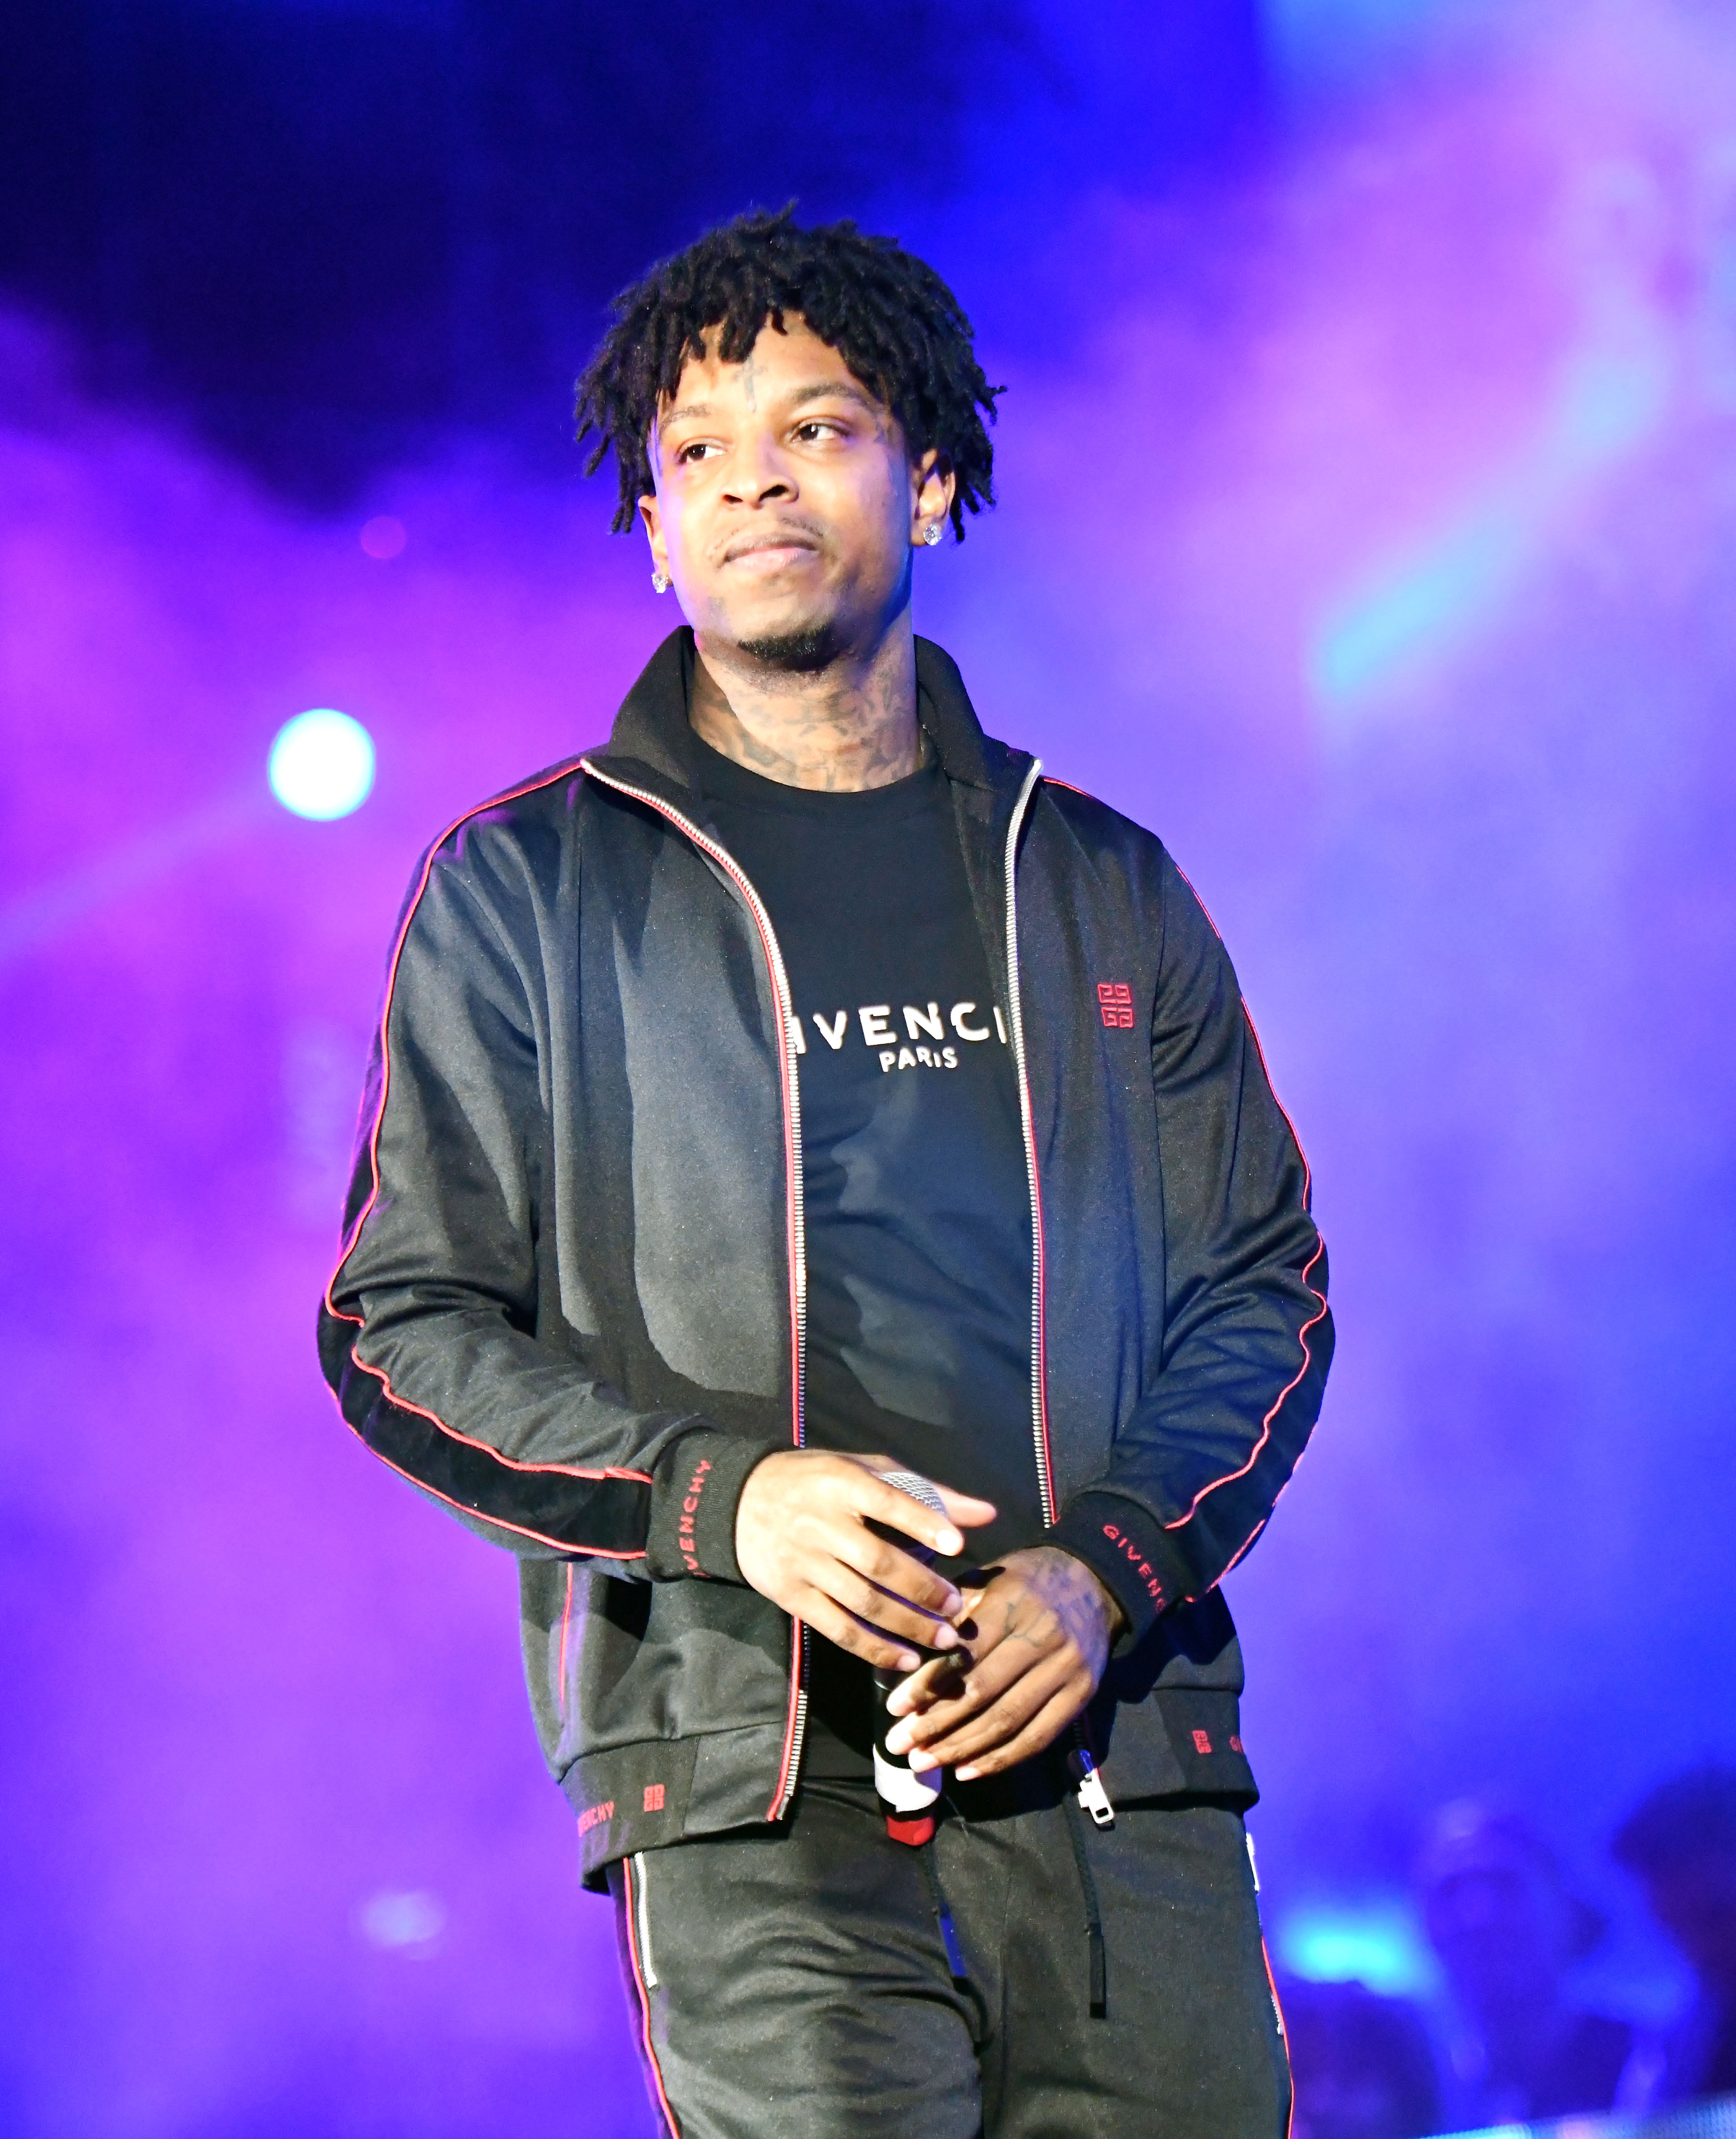 21 Savage Set To Return 'Home' For His First-Ever UK Show